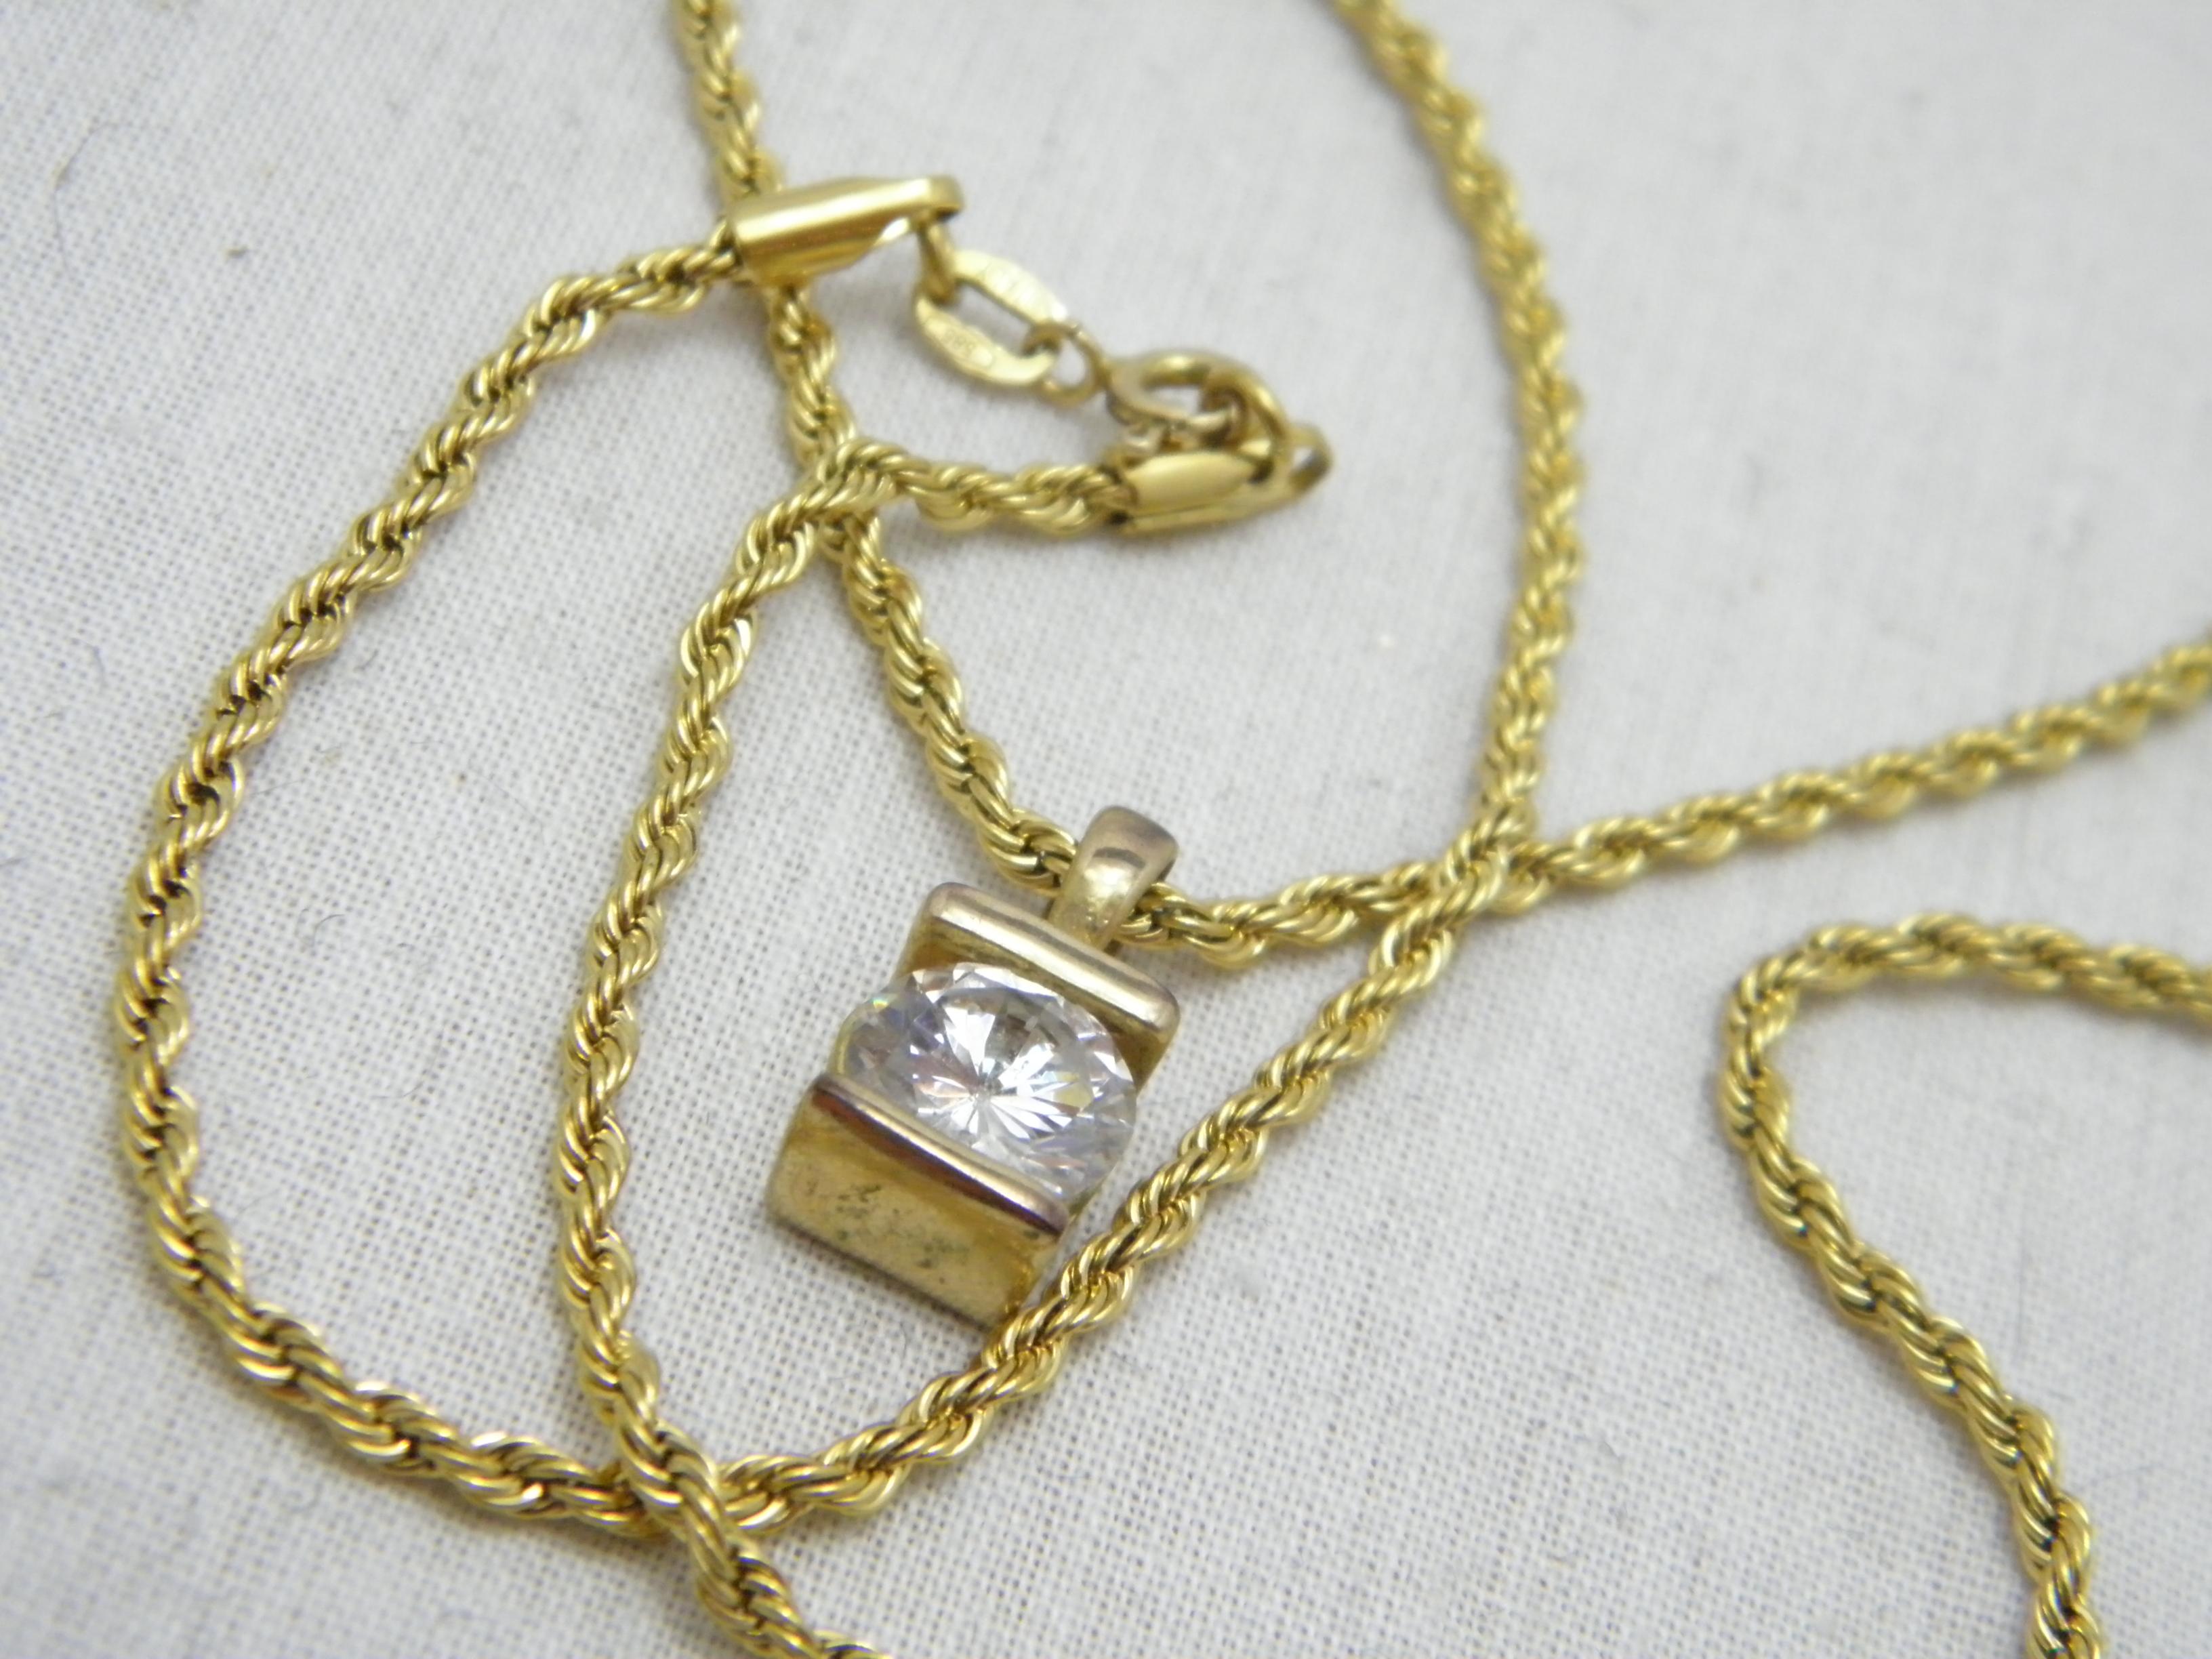 Vintage 14ct Gold Heavy Diamond Paste Pendant Necklace Rope Chain 585 18 Inch For Sale 4